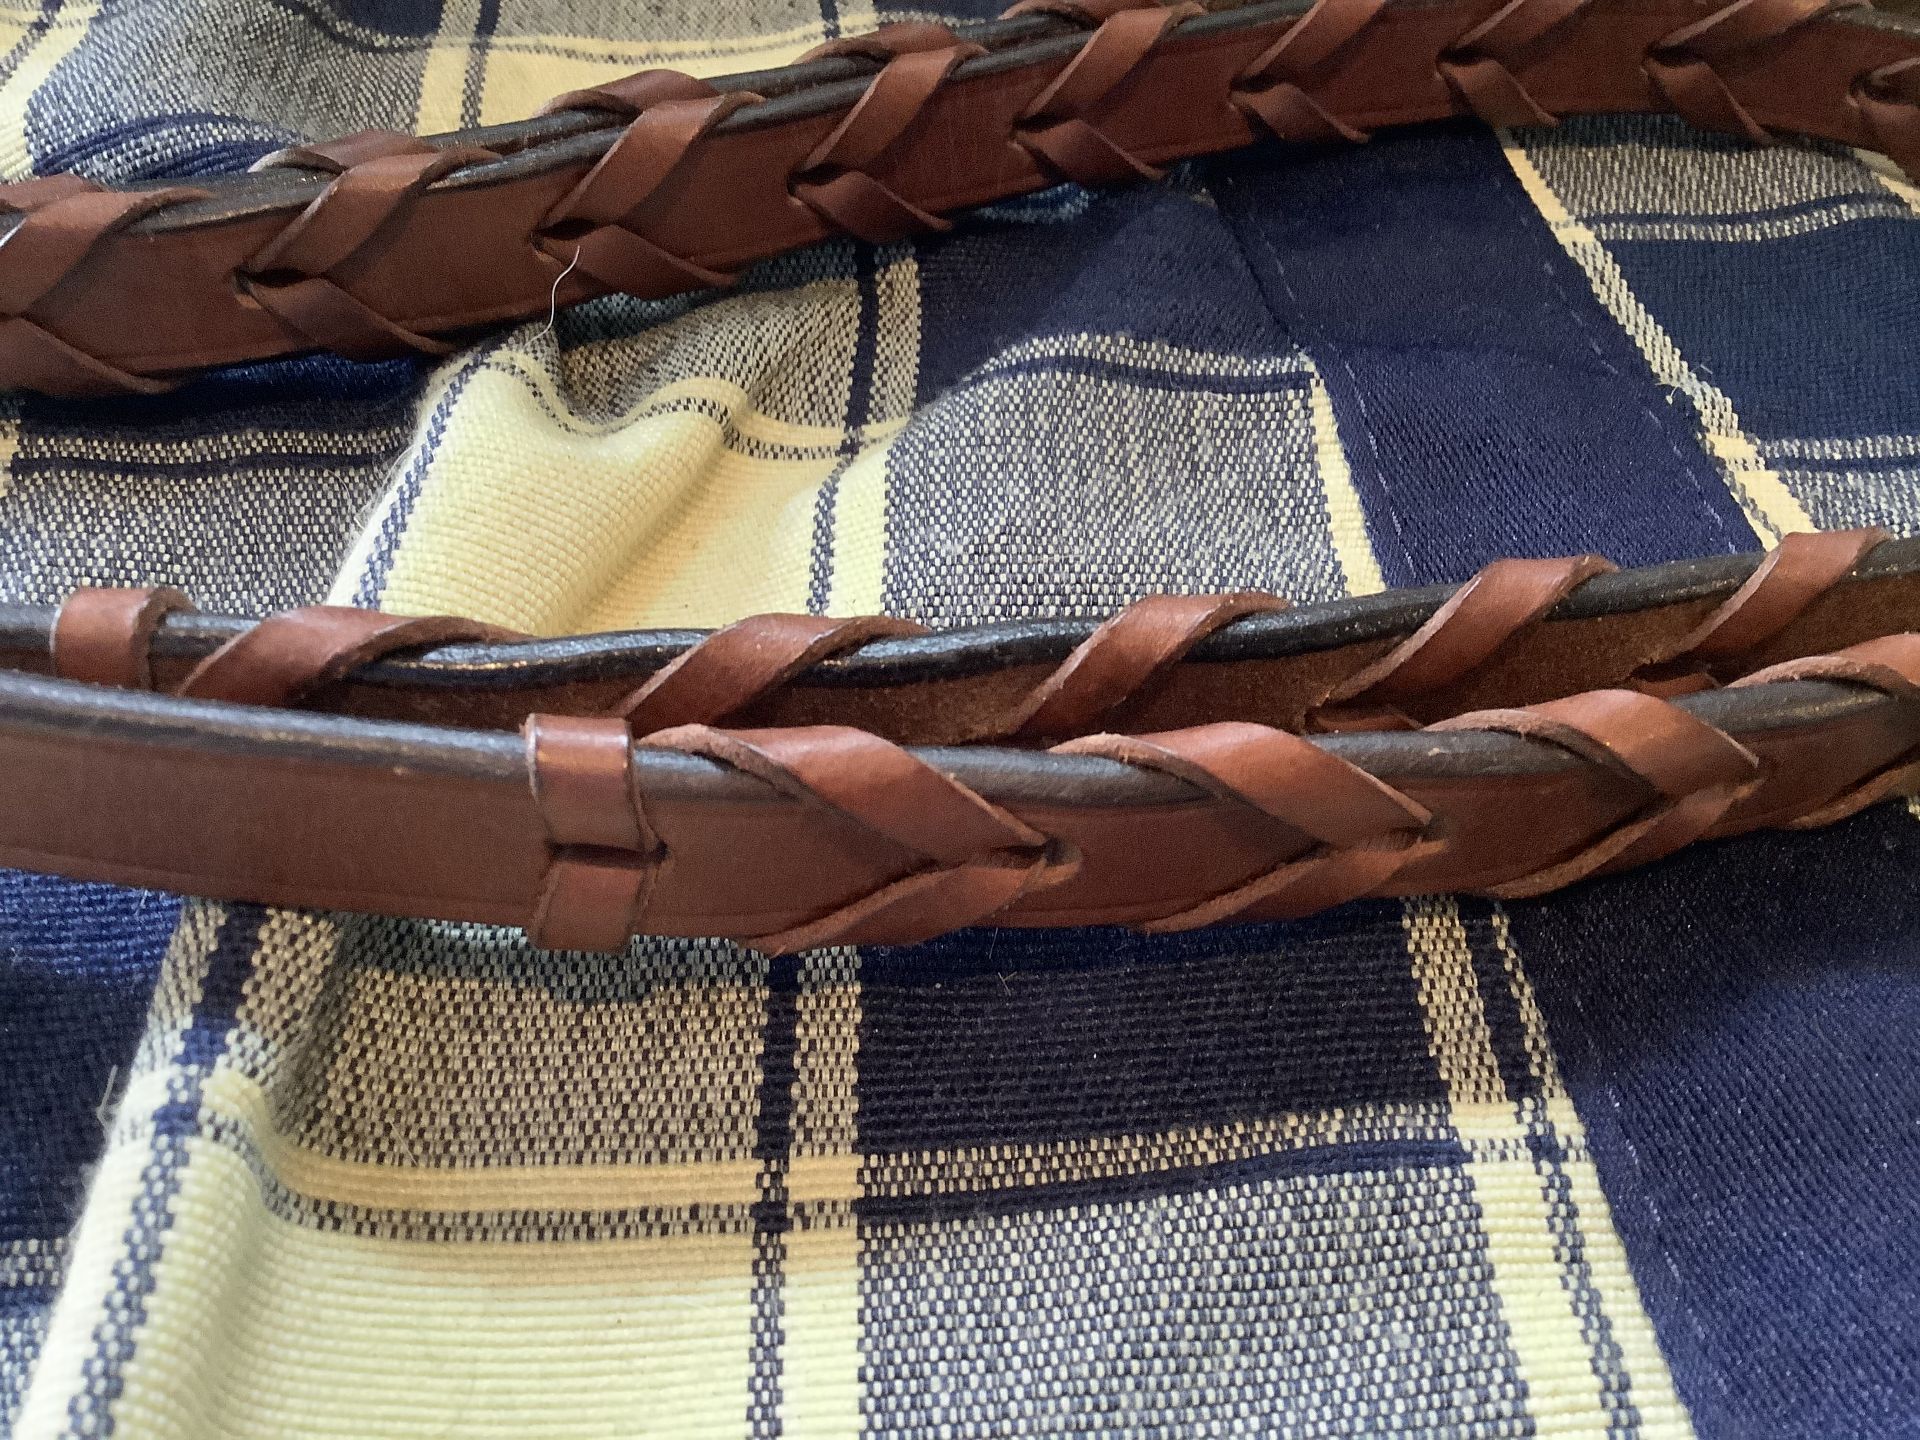 New Full Size Laced Reins - Stunning! - Image 2 of 3